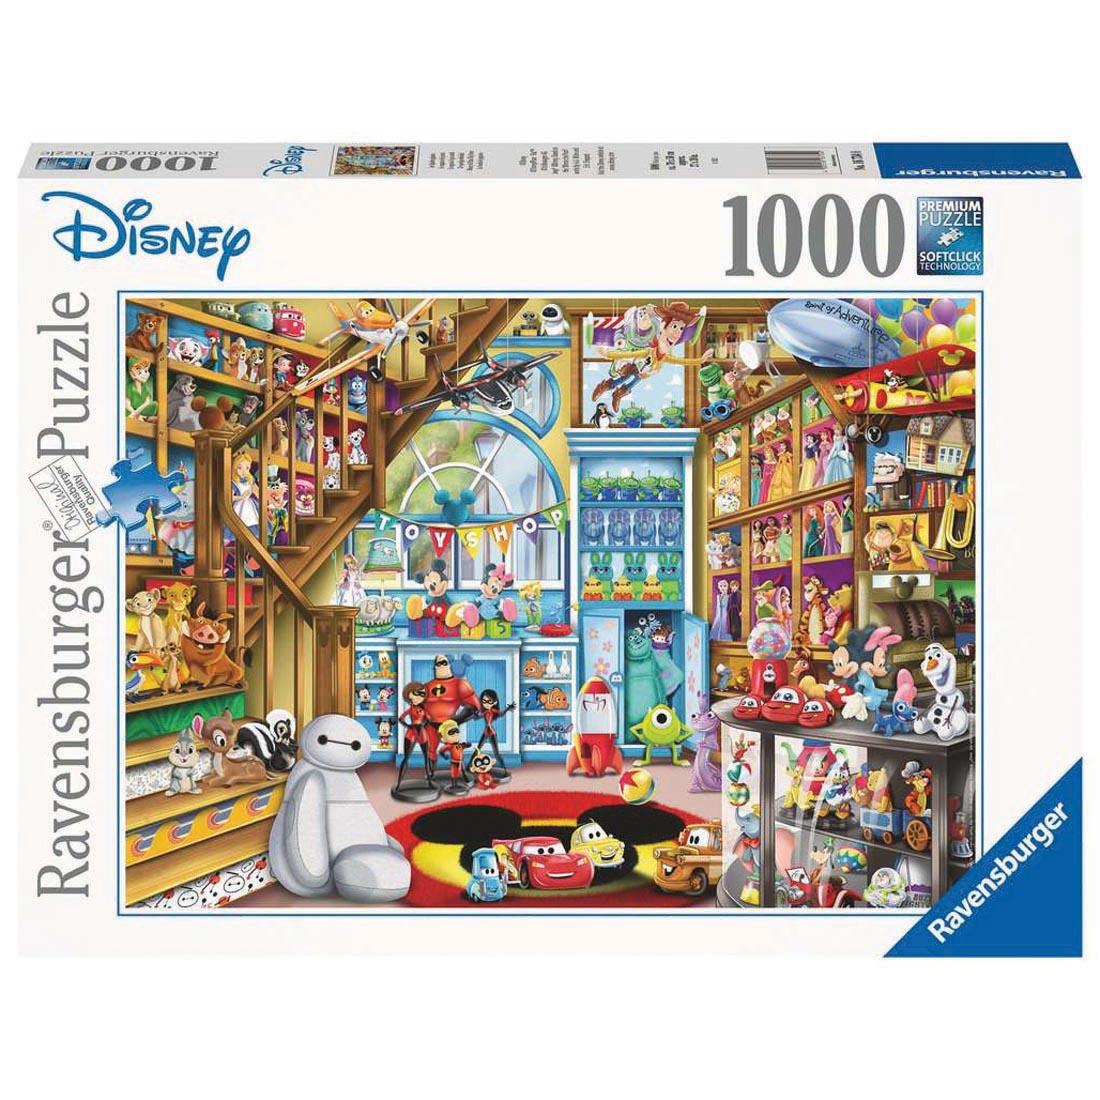 box of Disney-Pixar Toy Store 1000-Piece Puzzle By Ravensburger